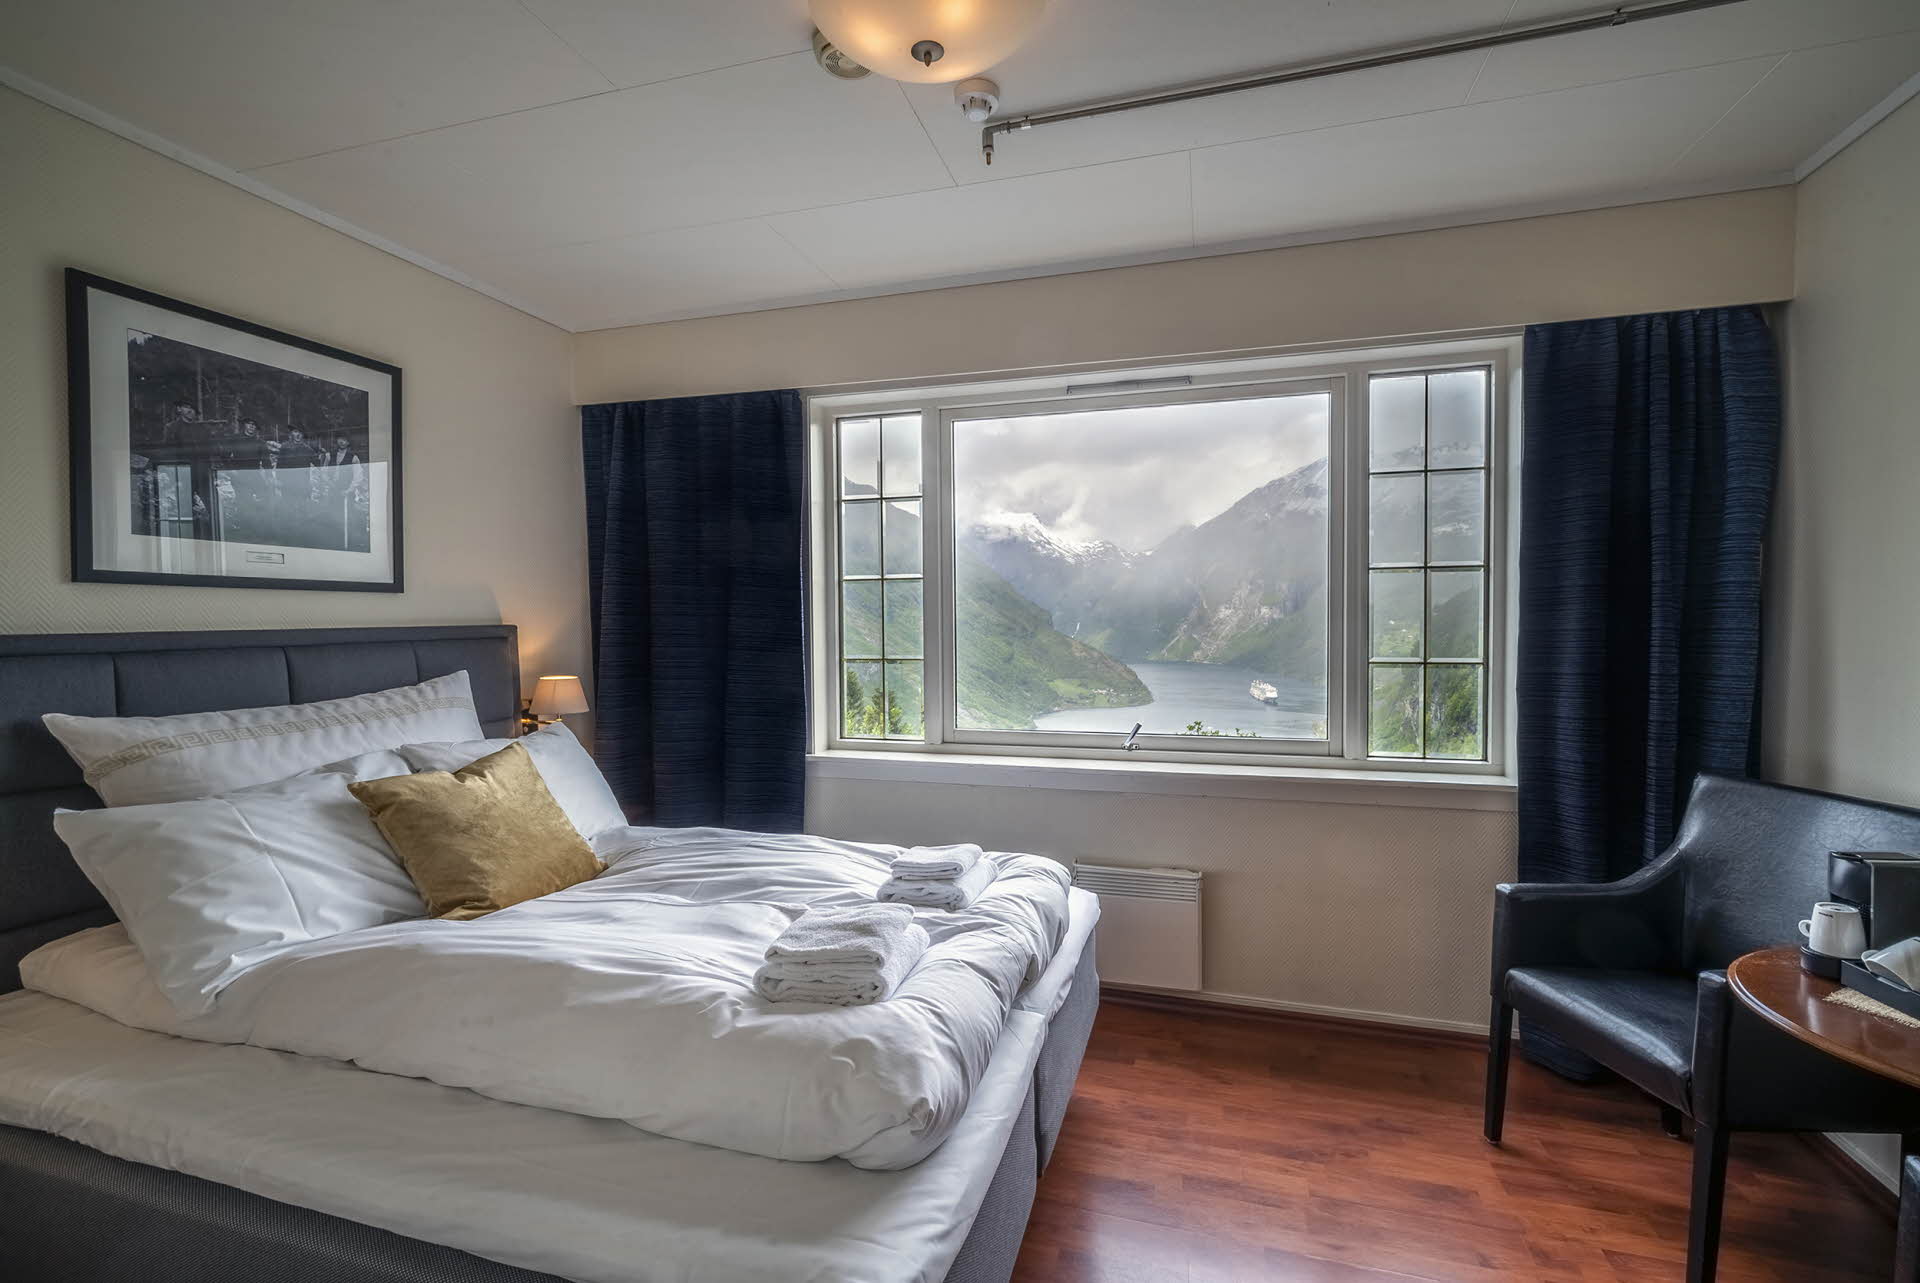 Interior of a double room at Hotel Utsikten. Bed, lounge chair, table and window with fjord view. 